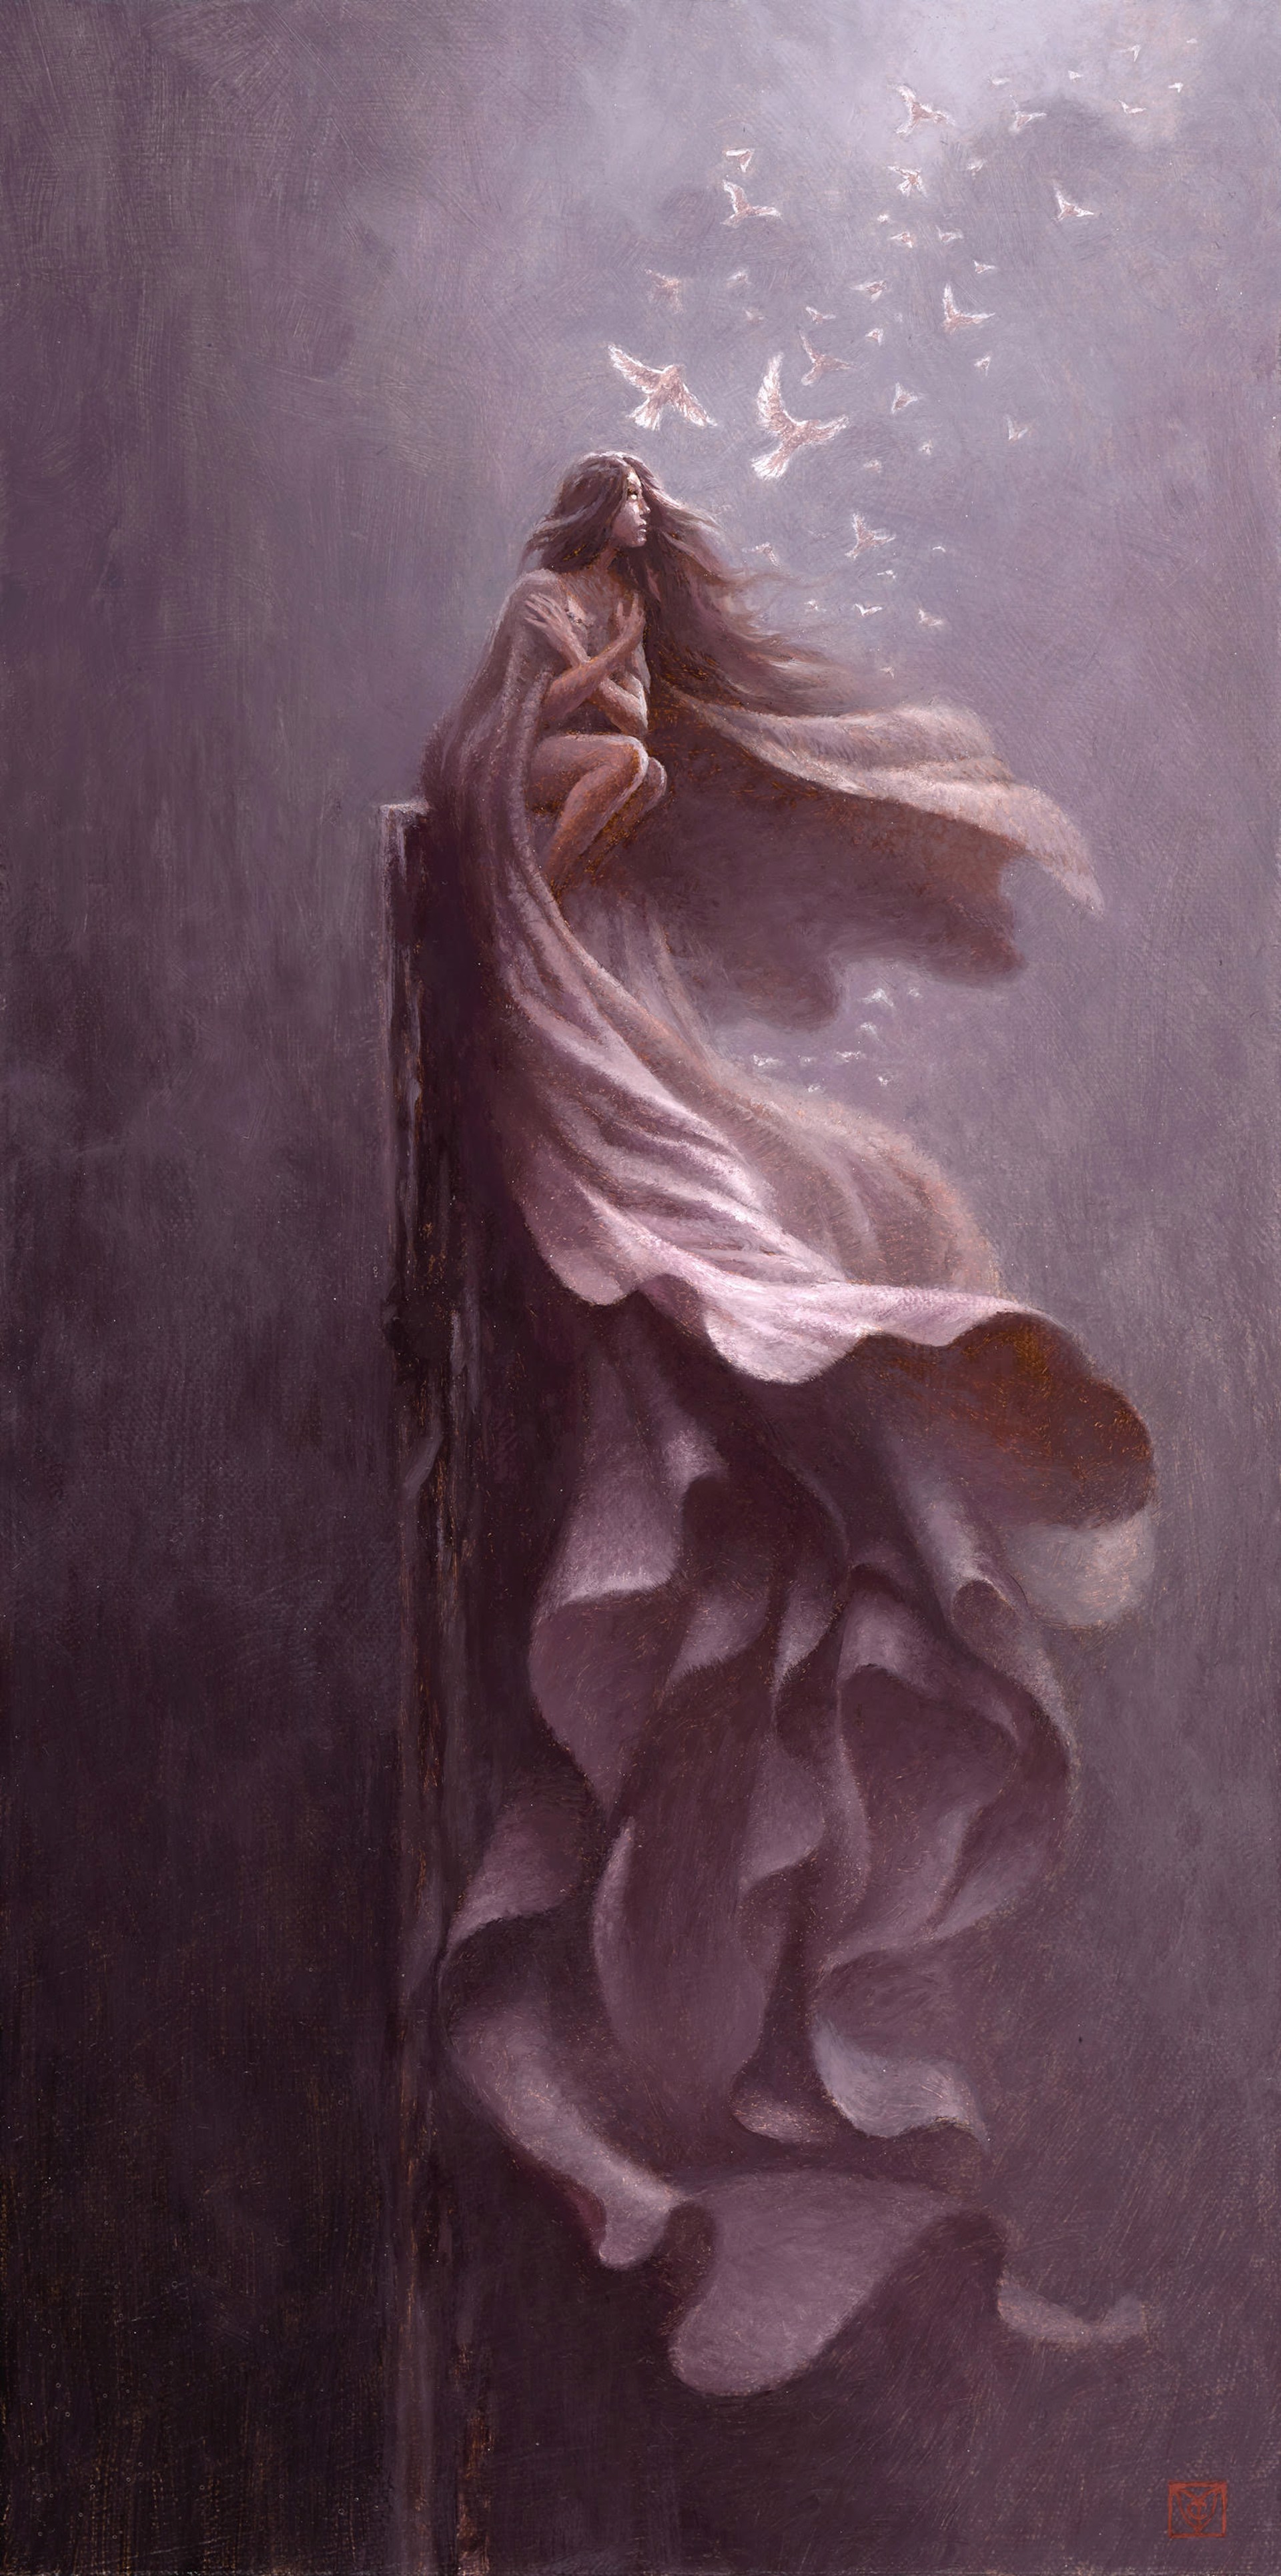 Glimmer Of Hope by Christophe Vacher